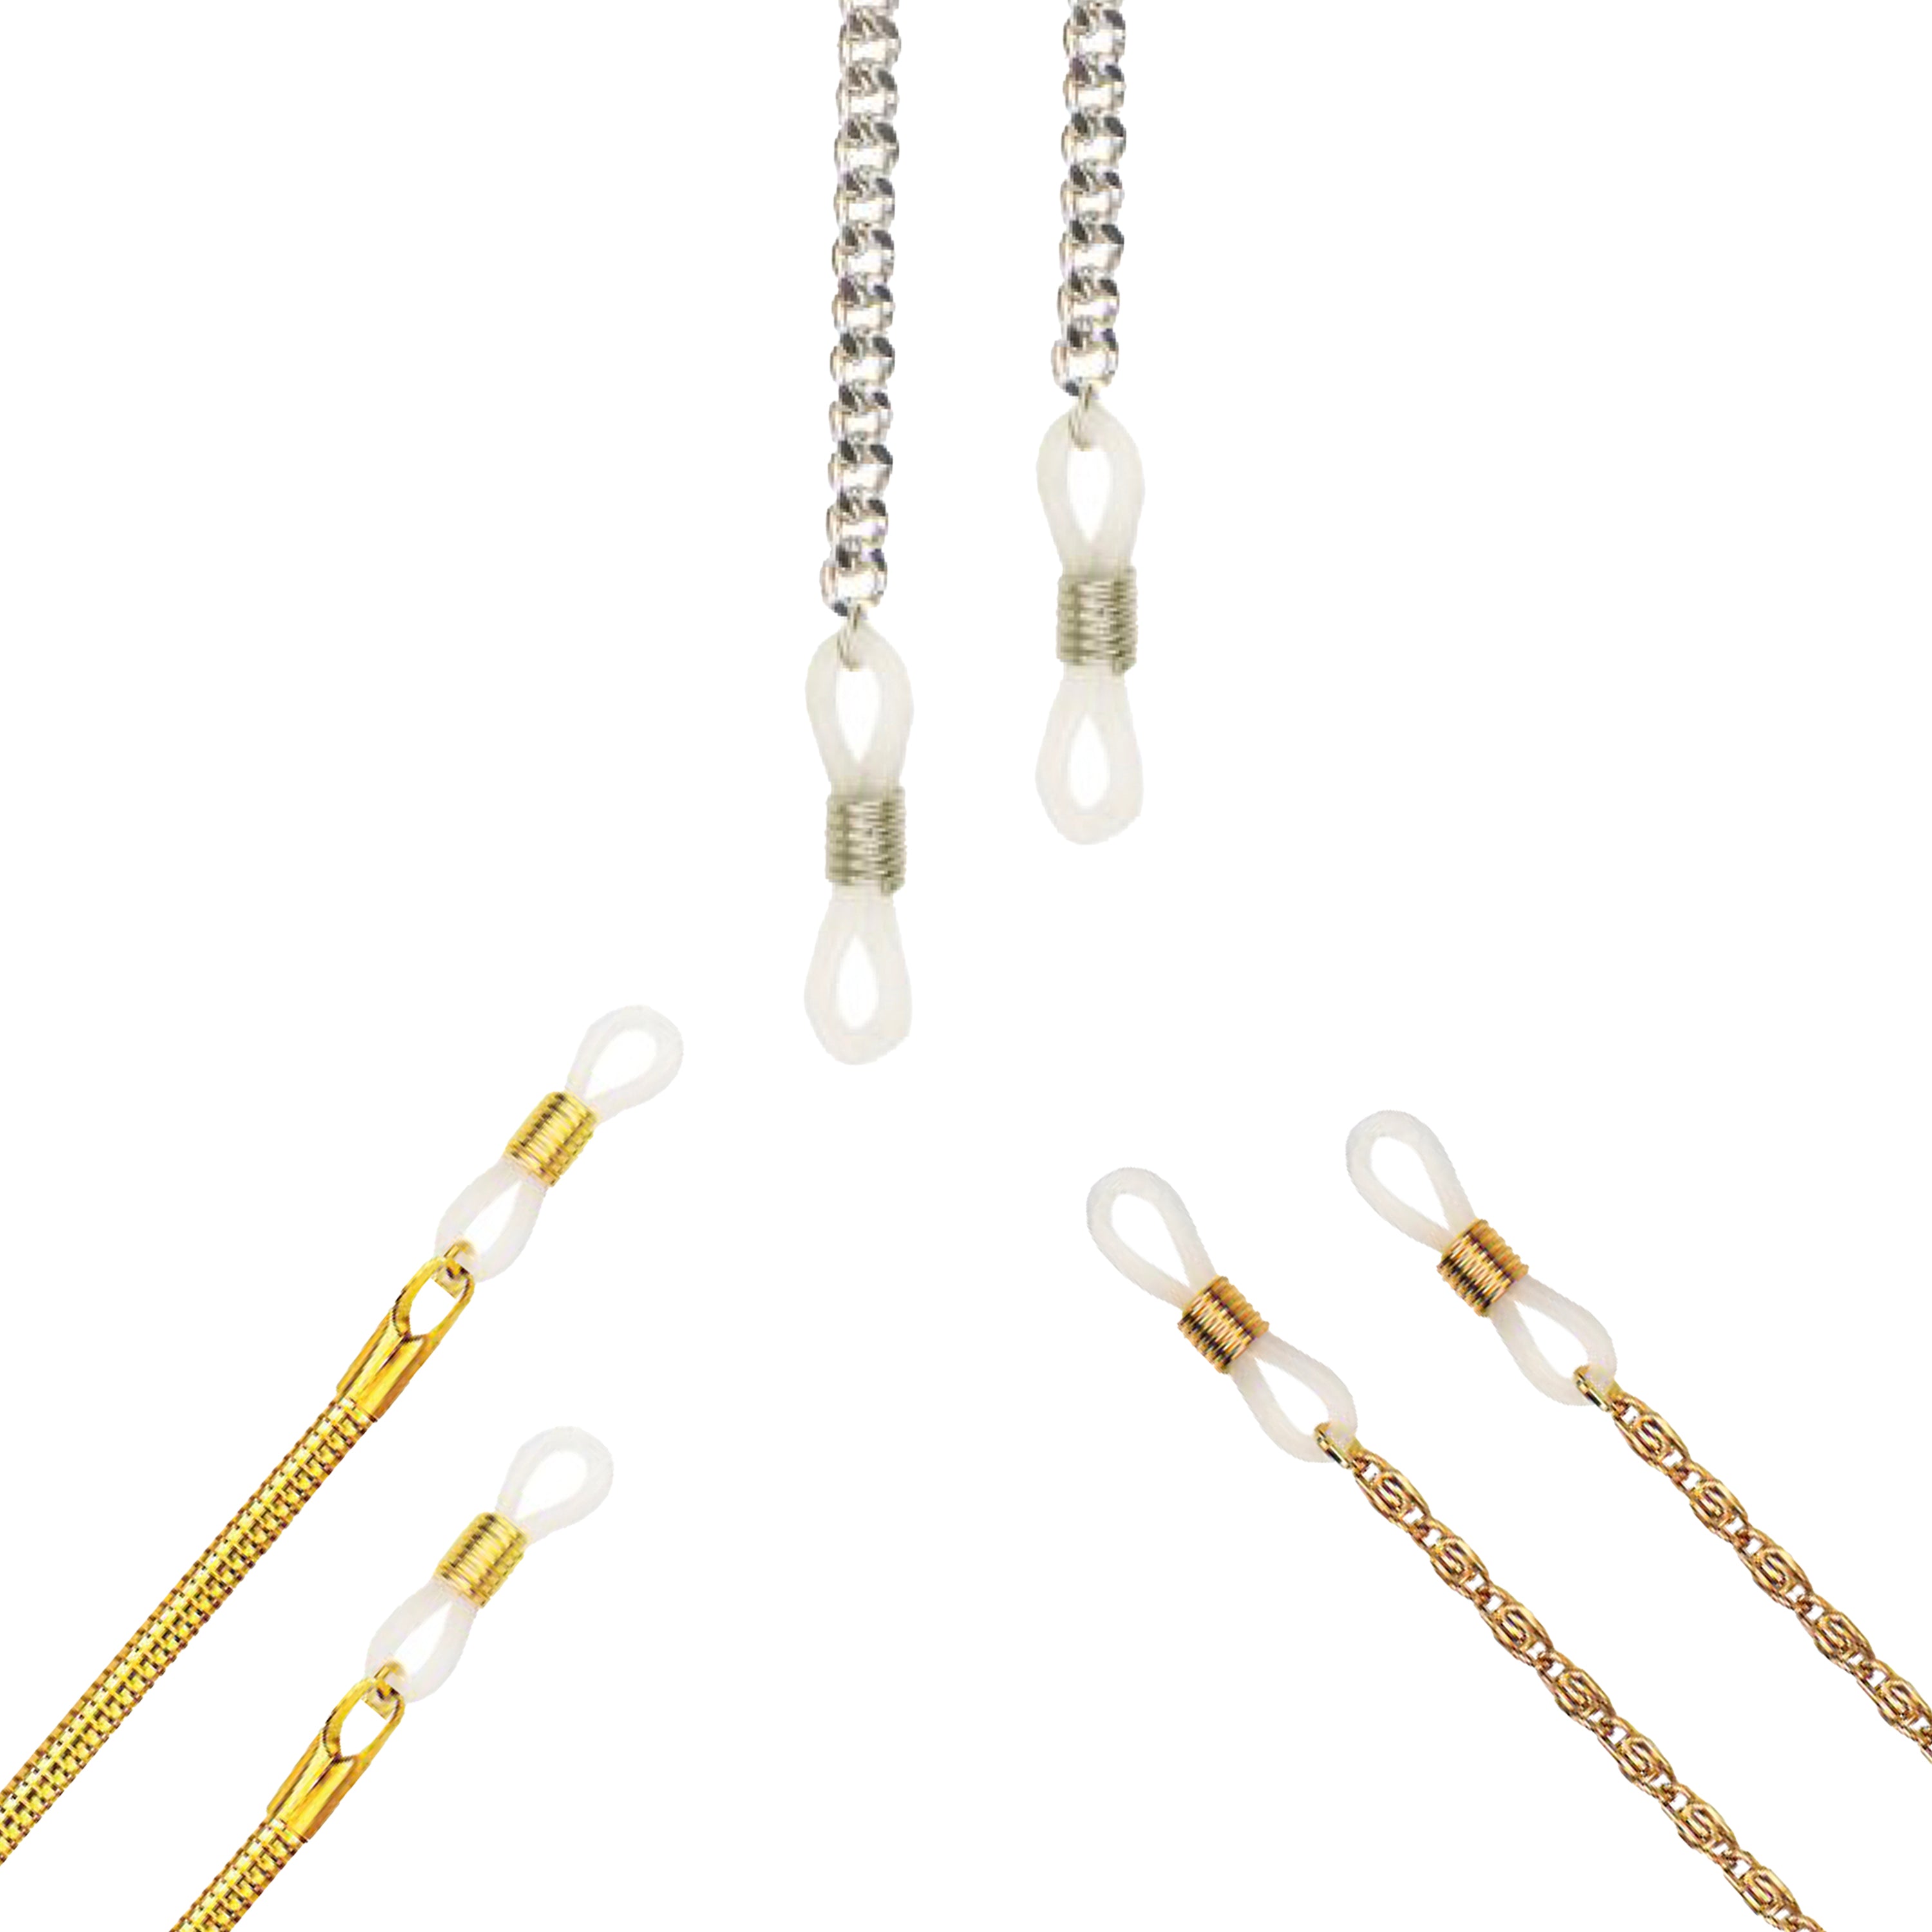 QUICK PICK PACK - Eyeglass Chains